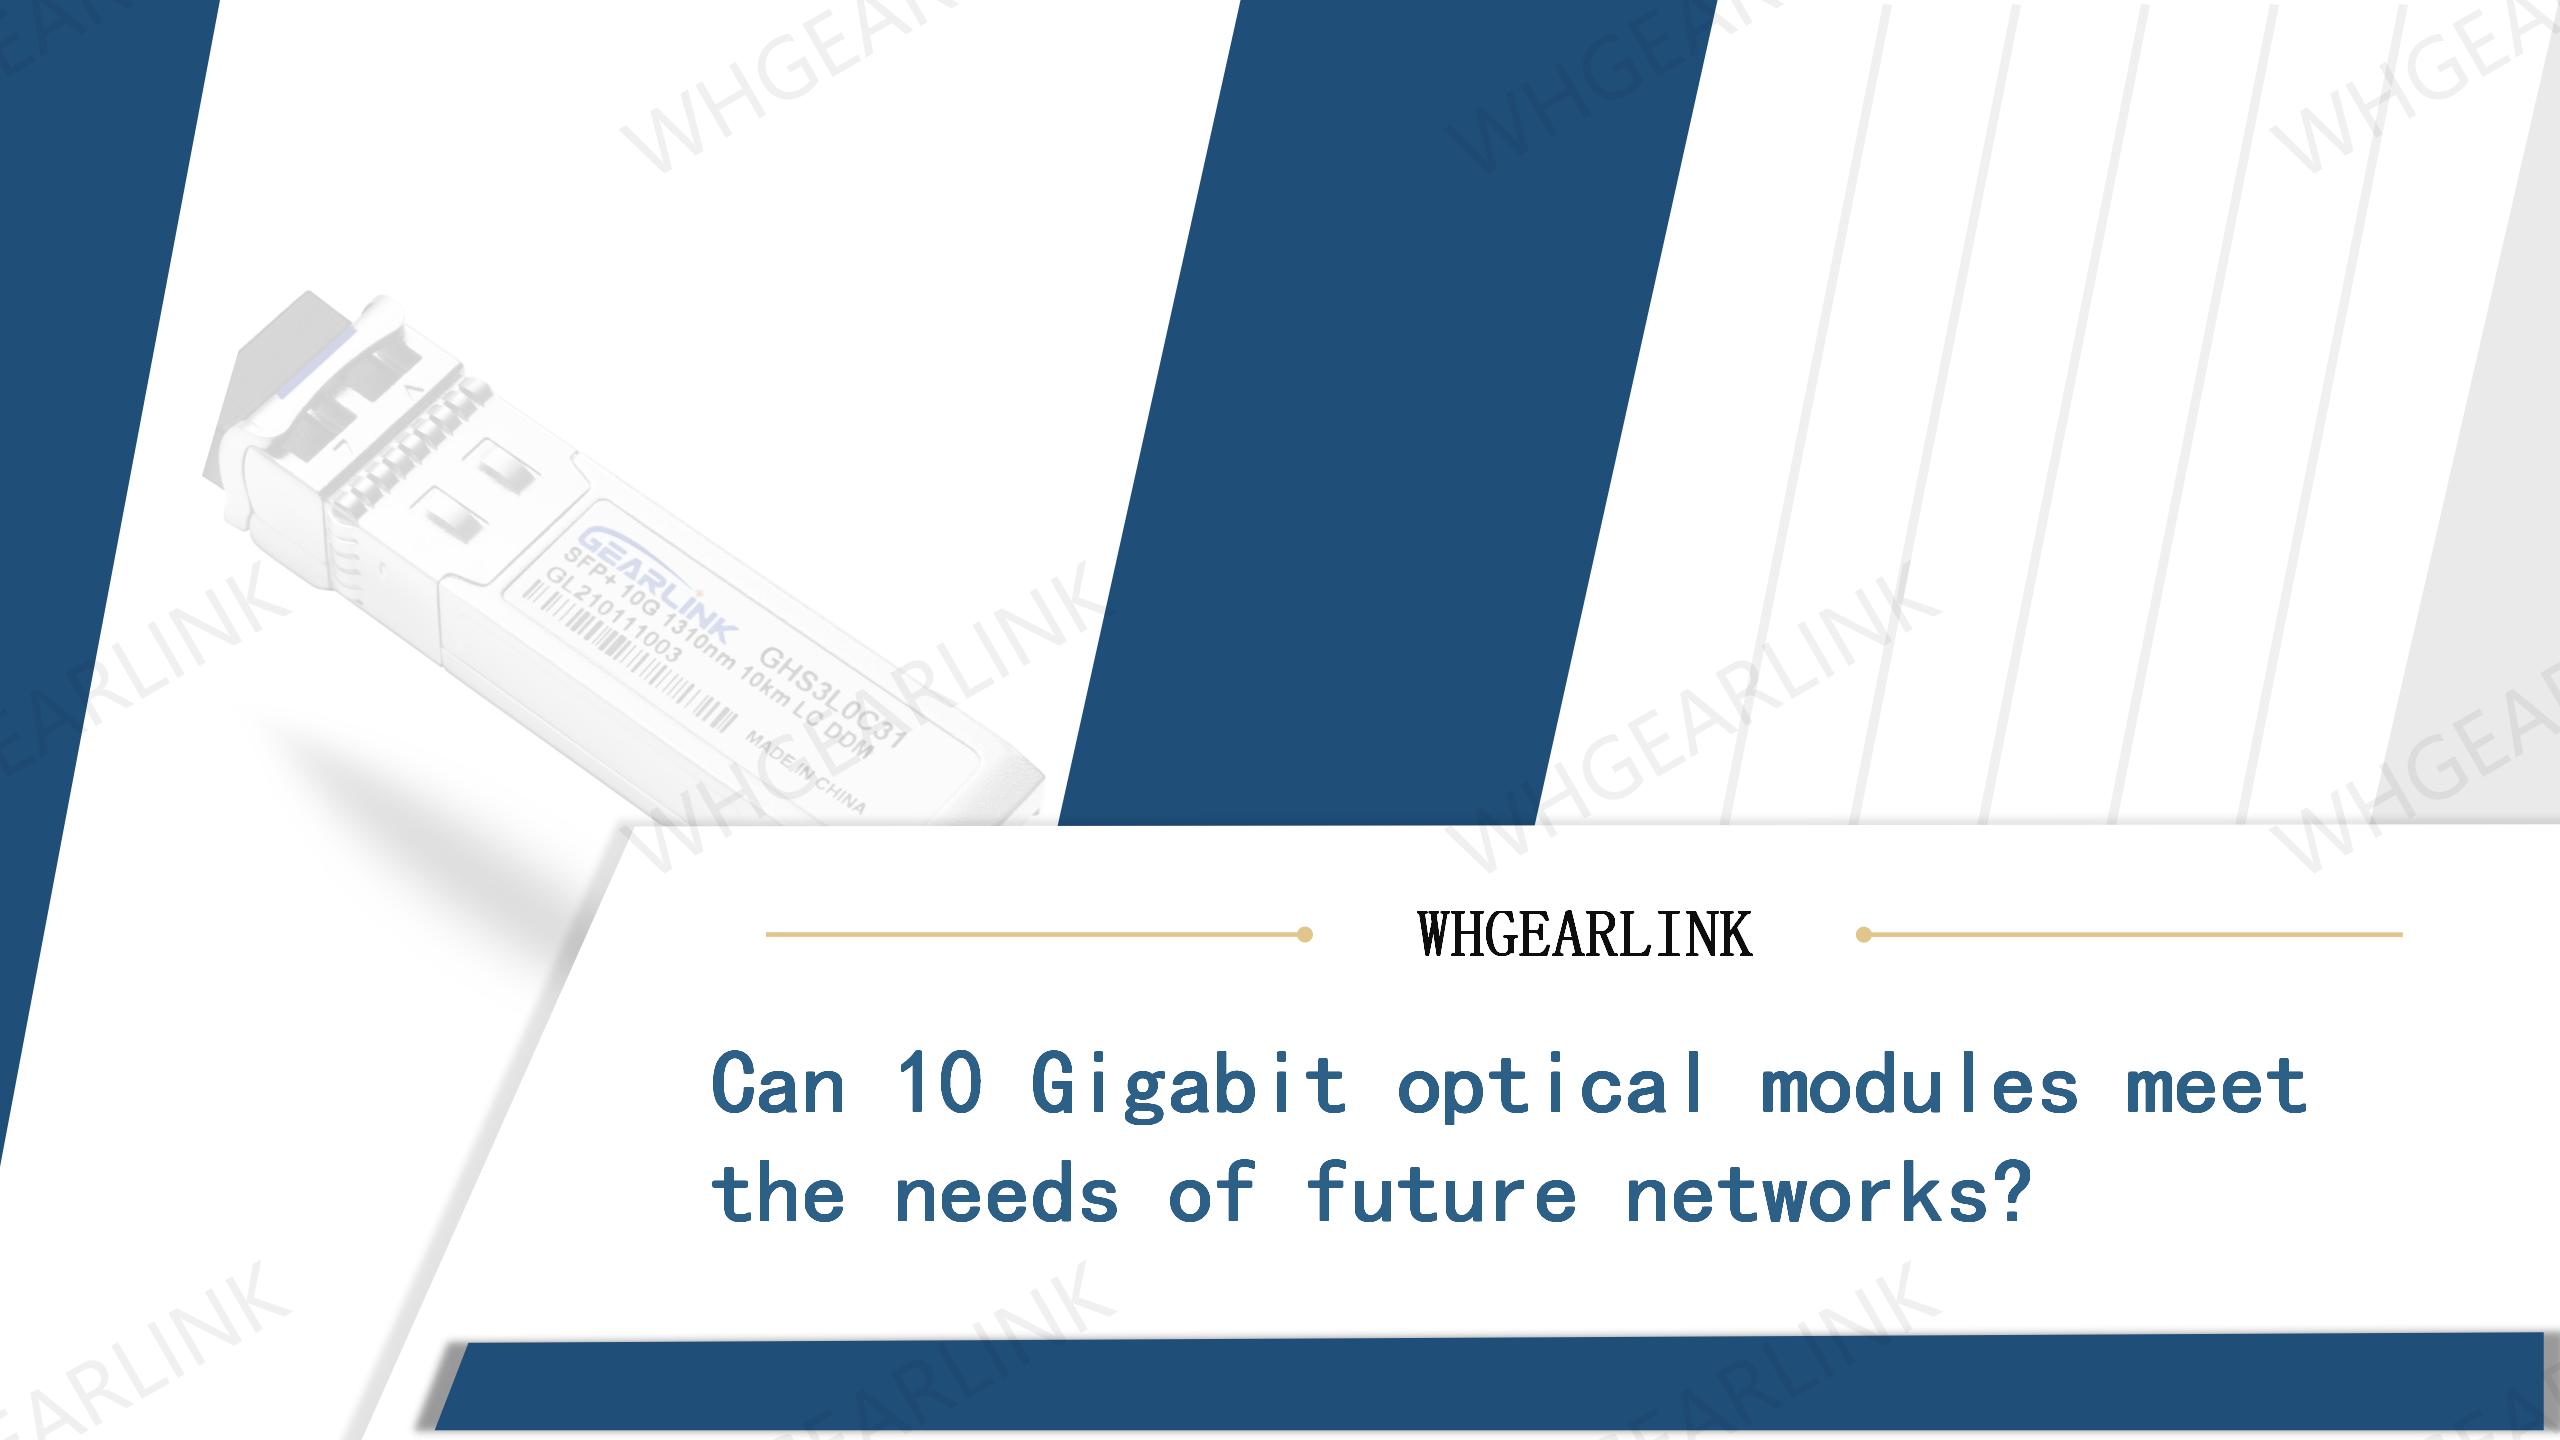 Can 10 Gigabit optical modules meet the needs of future networks?